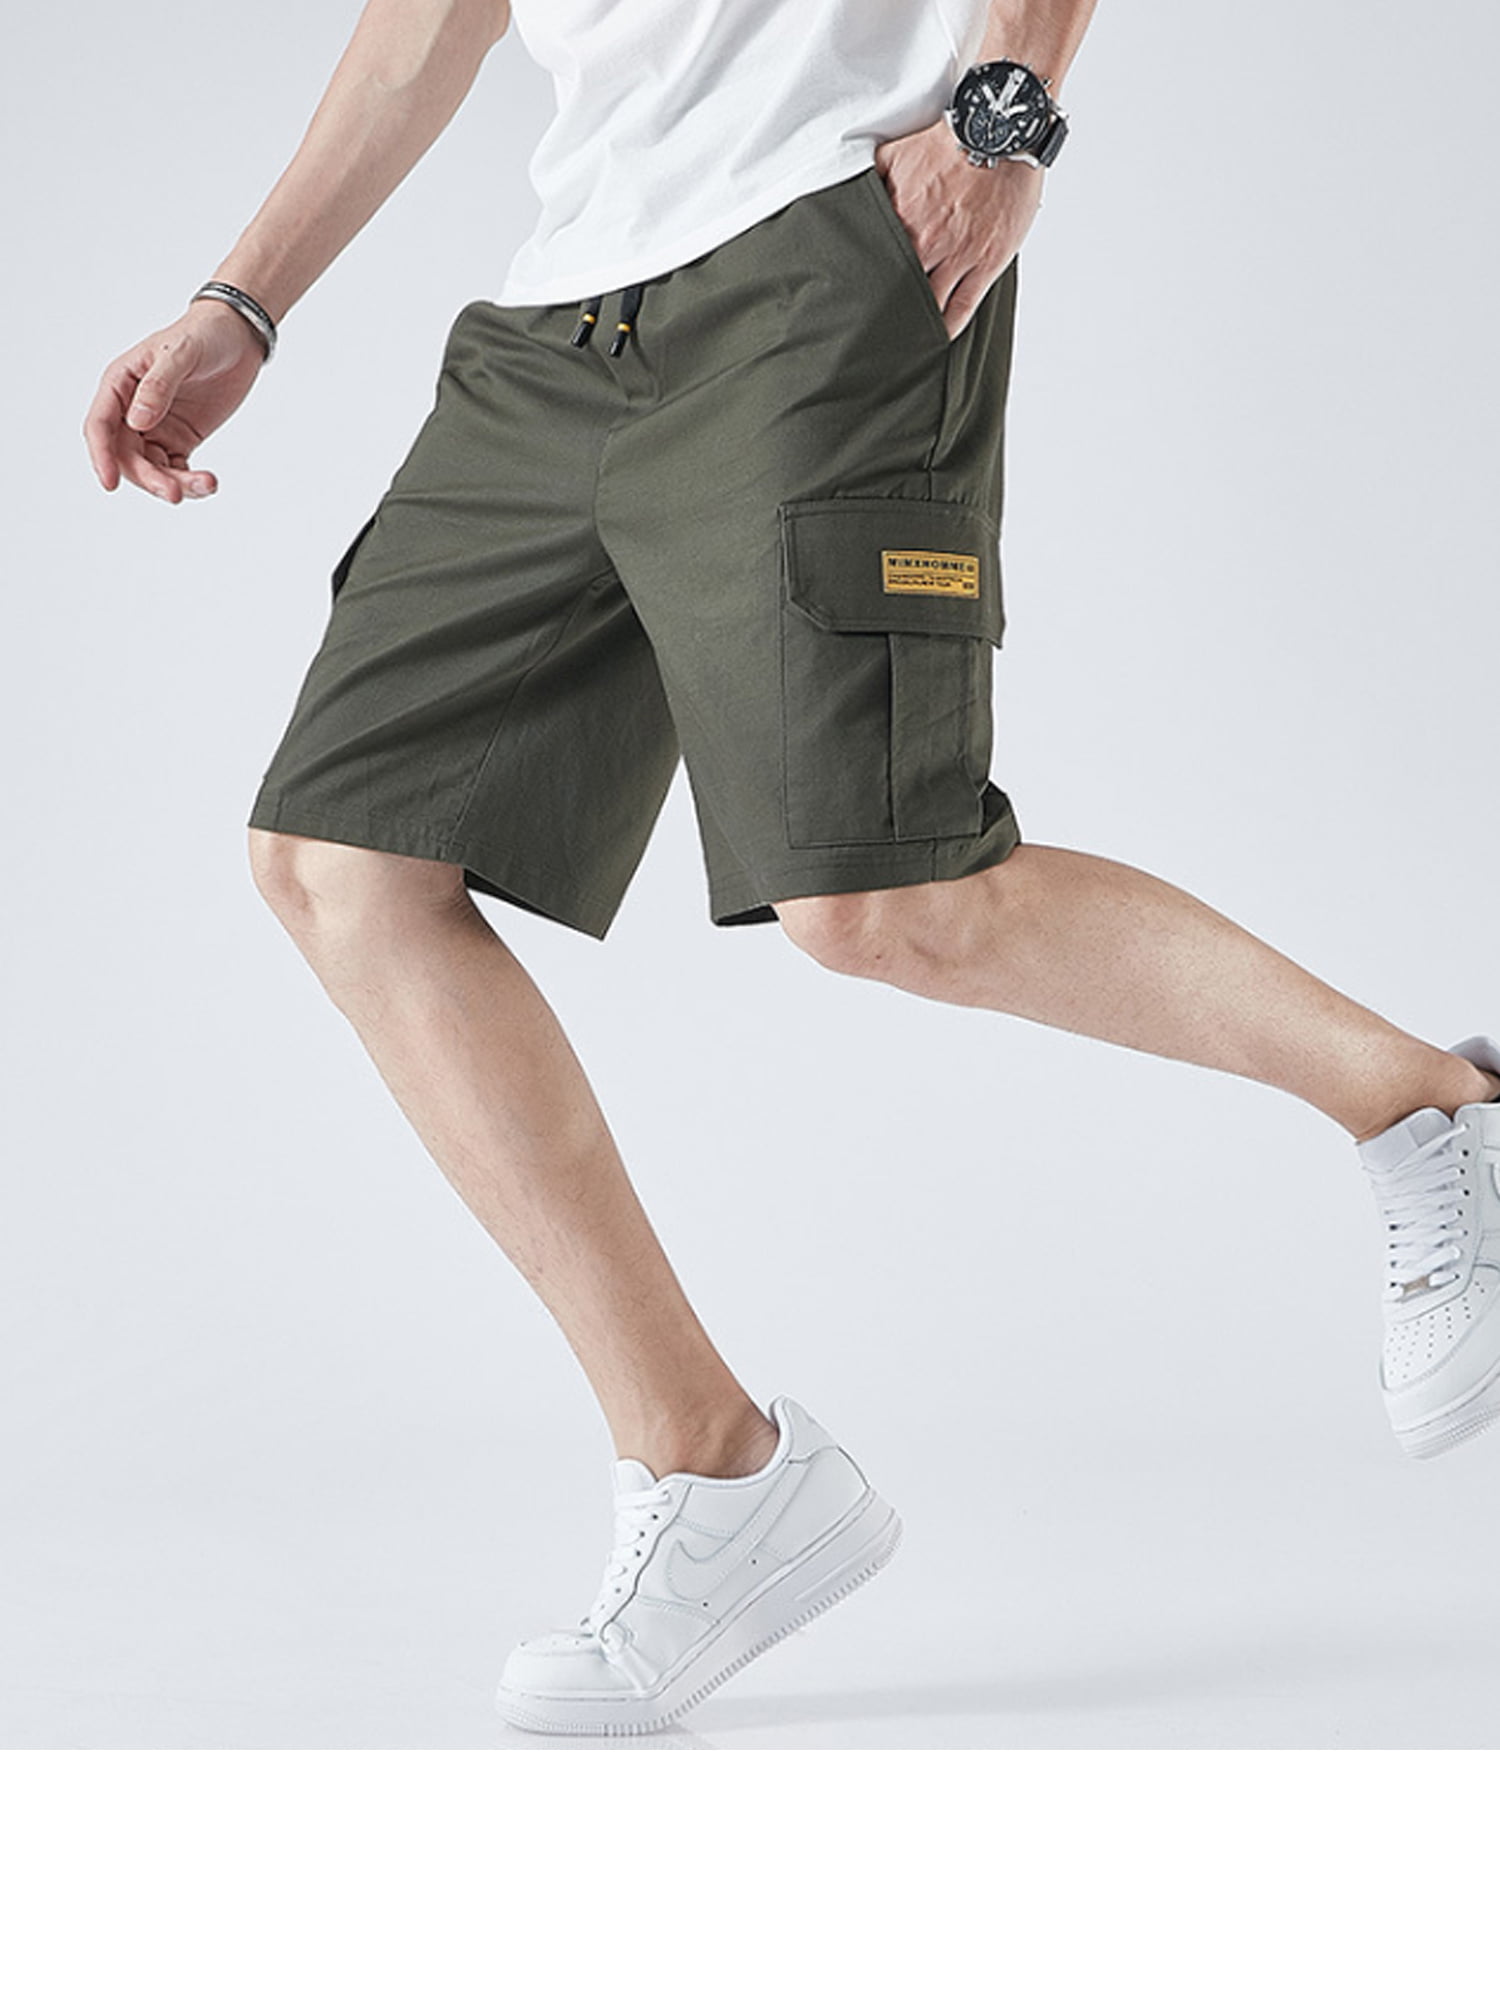 ROBO Classic Camo Cargo Shorts Mens Leisure Multi-Pockets Short Relaxed Fit